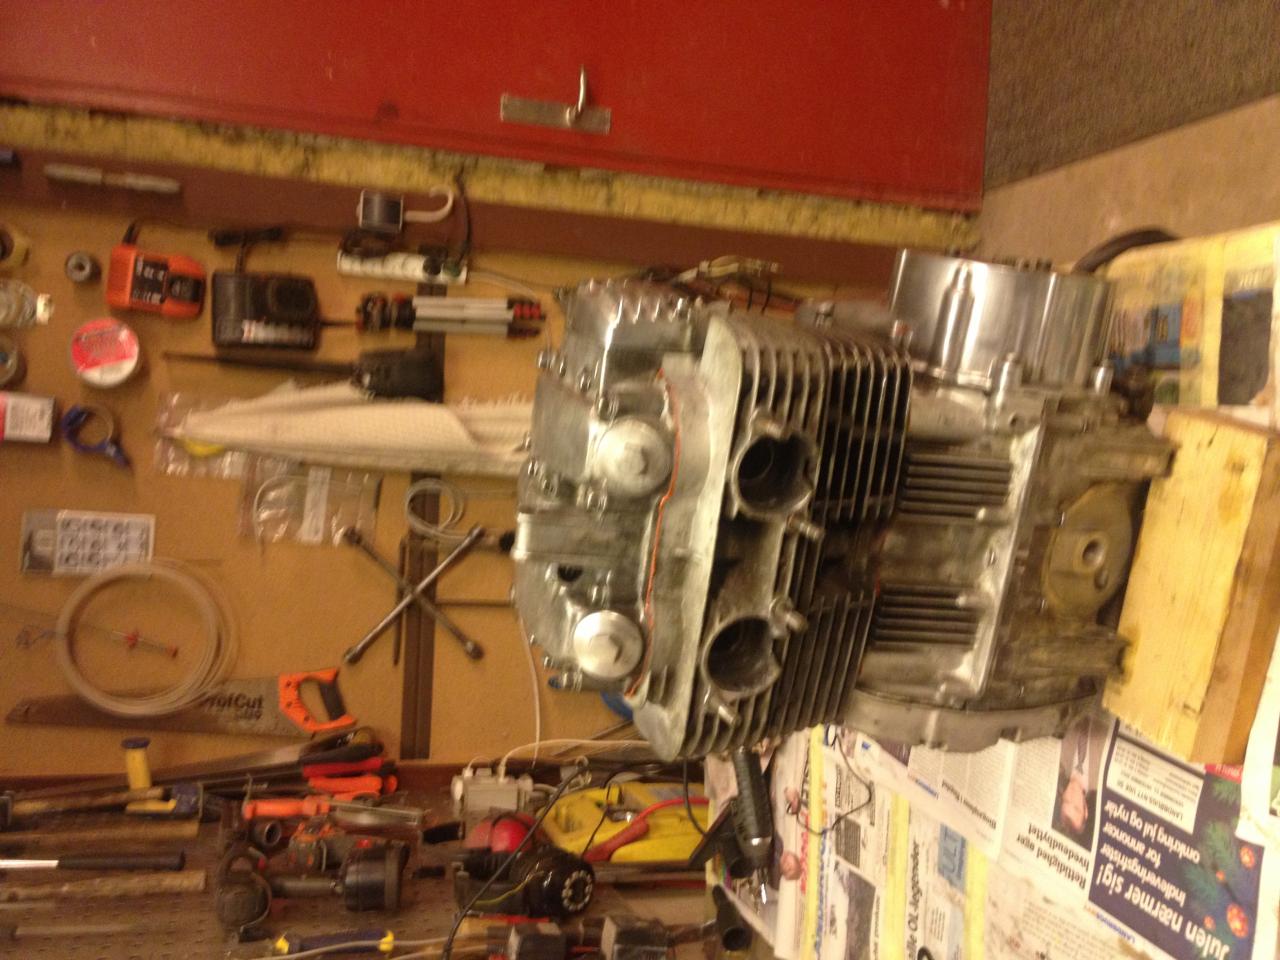 Wrong cam cover on :( 

Thanks Drewpy for telling me cylinderhead and camcover must have matching numbers.